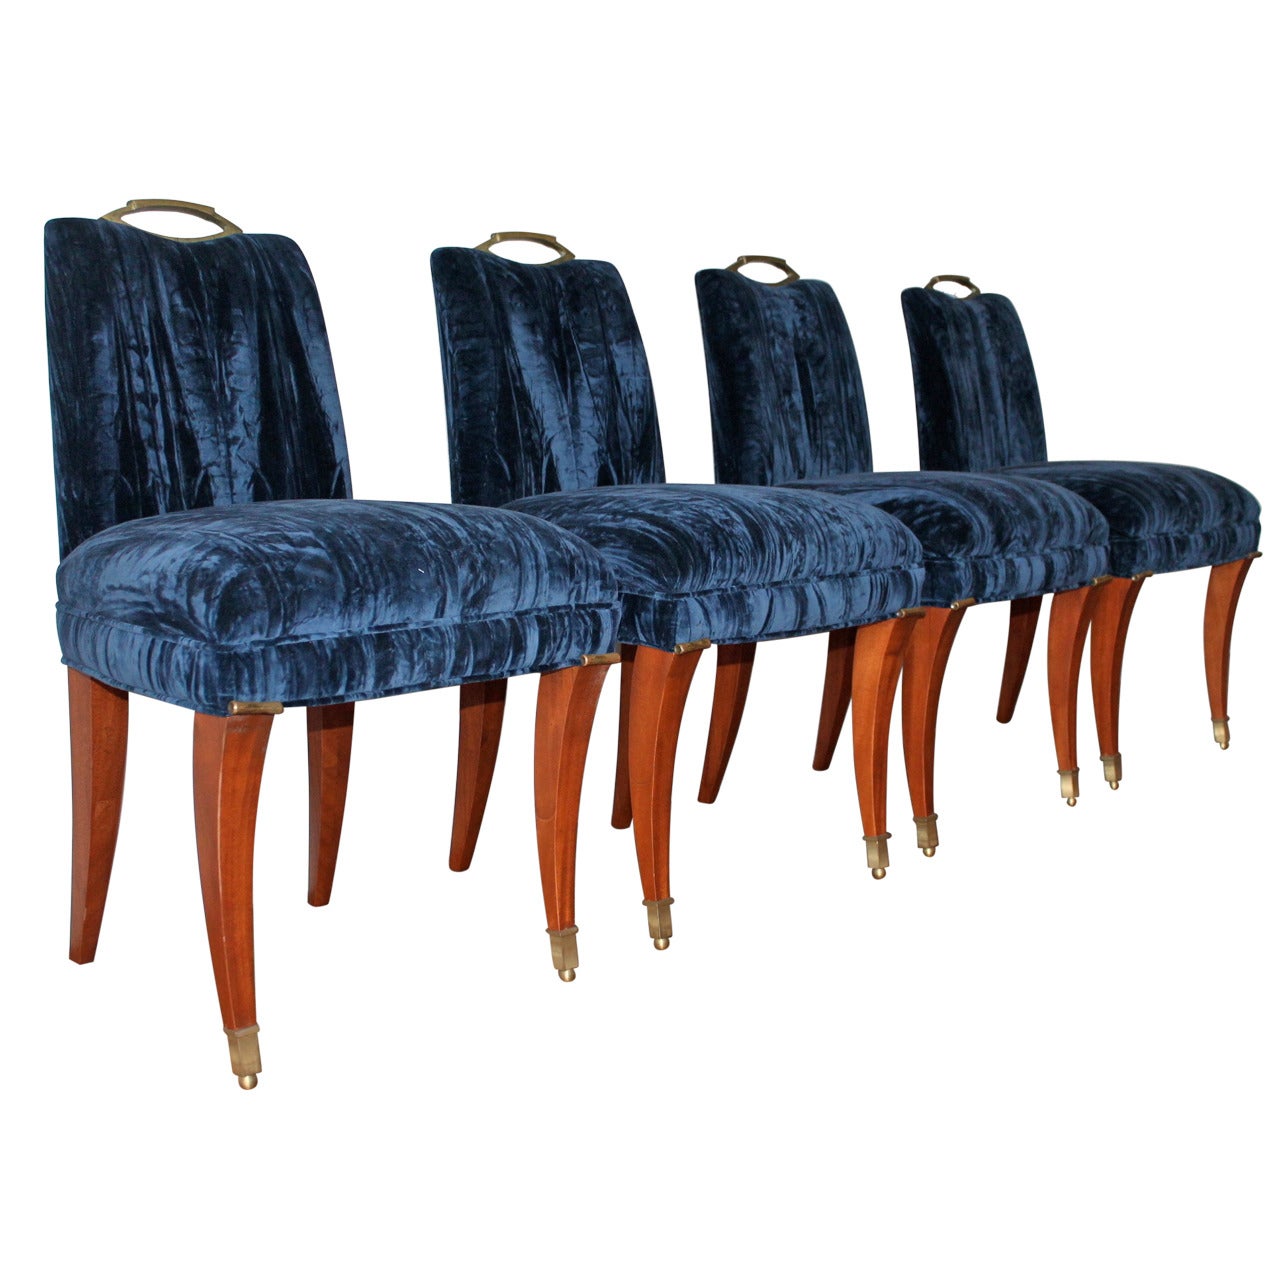 Arturo Pani Mahogany and Crushed Blue Velvet Dining Chairs, Mexico, 1950s